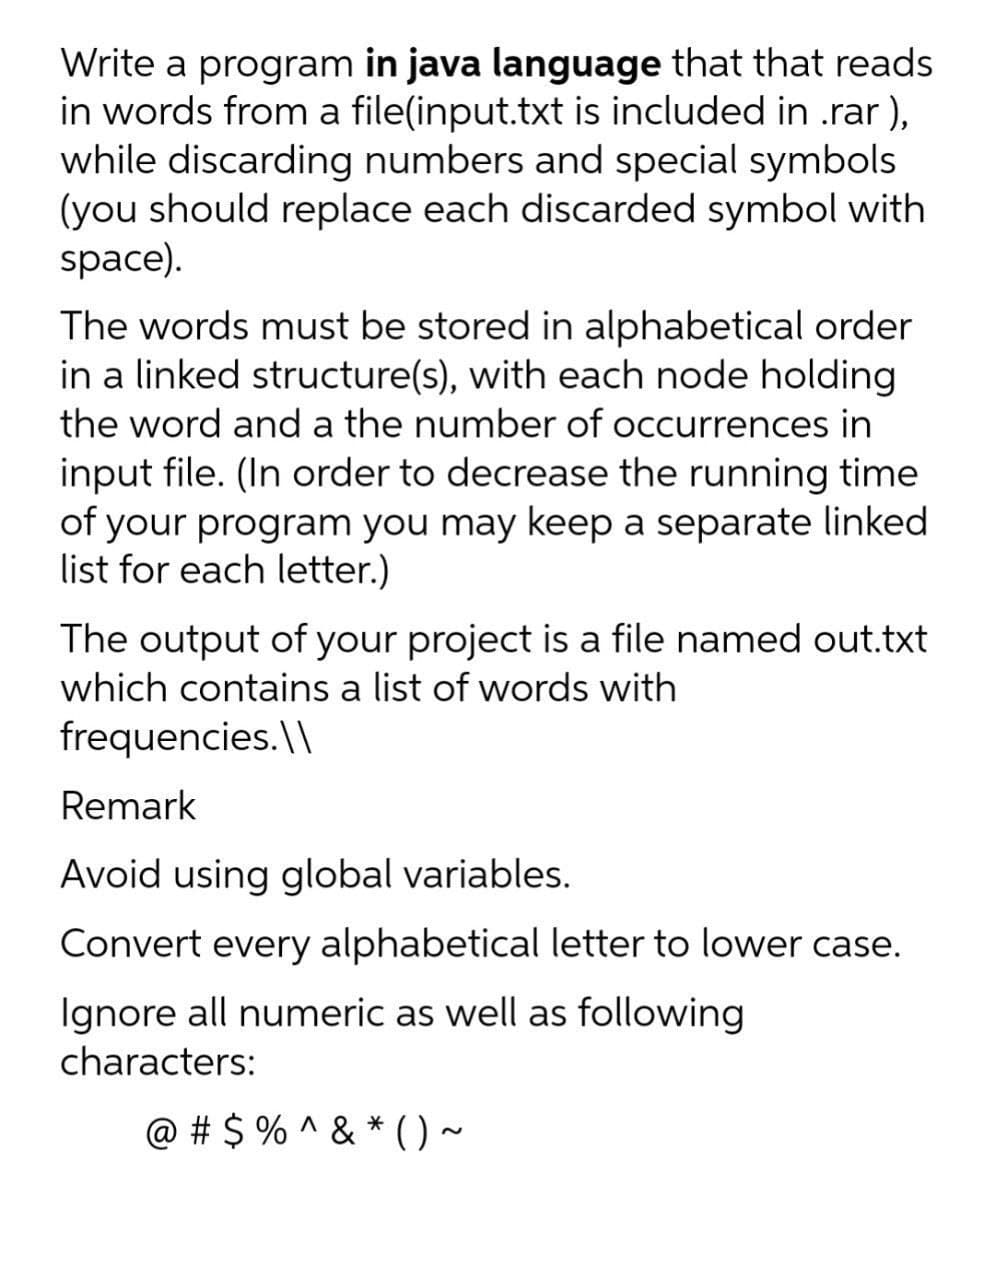 Write a program in java language that that reads
in words from a file(input.txt is included in .rar ),
while discarding numbers and special symbols
(you should replace each discarded symbol with
space).
The words must be stored in alphabetical order
in a linked structure(s), with each node holding
the word and a the number of occurrences in
input file. (In order to decrease the running time
of your program you may keep a separate linked
list for each letter.)
The output of your project is a file named out.txt
which contains a list of words with
frequencies. \\
Remark
Avoid using global variables.
Convert every alphabetical letter to lower case.
Ignore all numeric as well as following
characters:
@ # $ % ^ & * () ~
